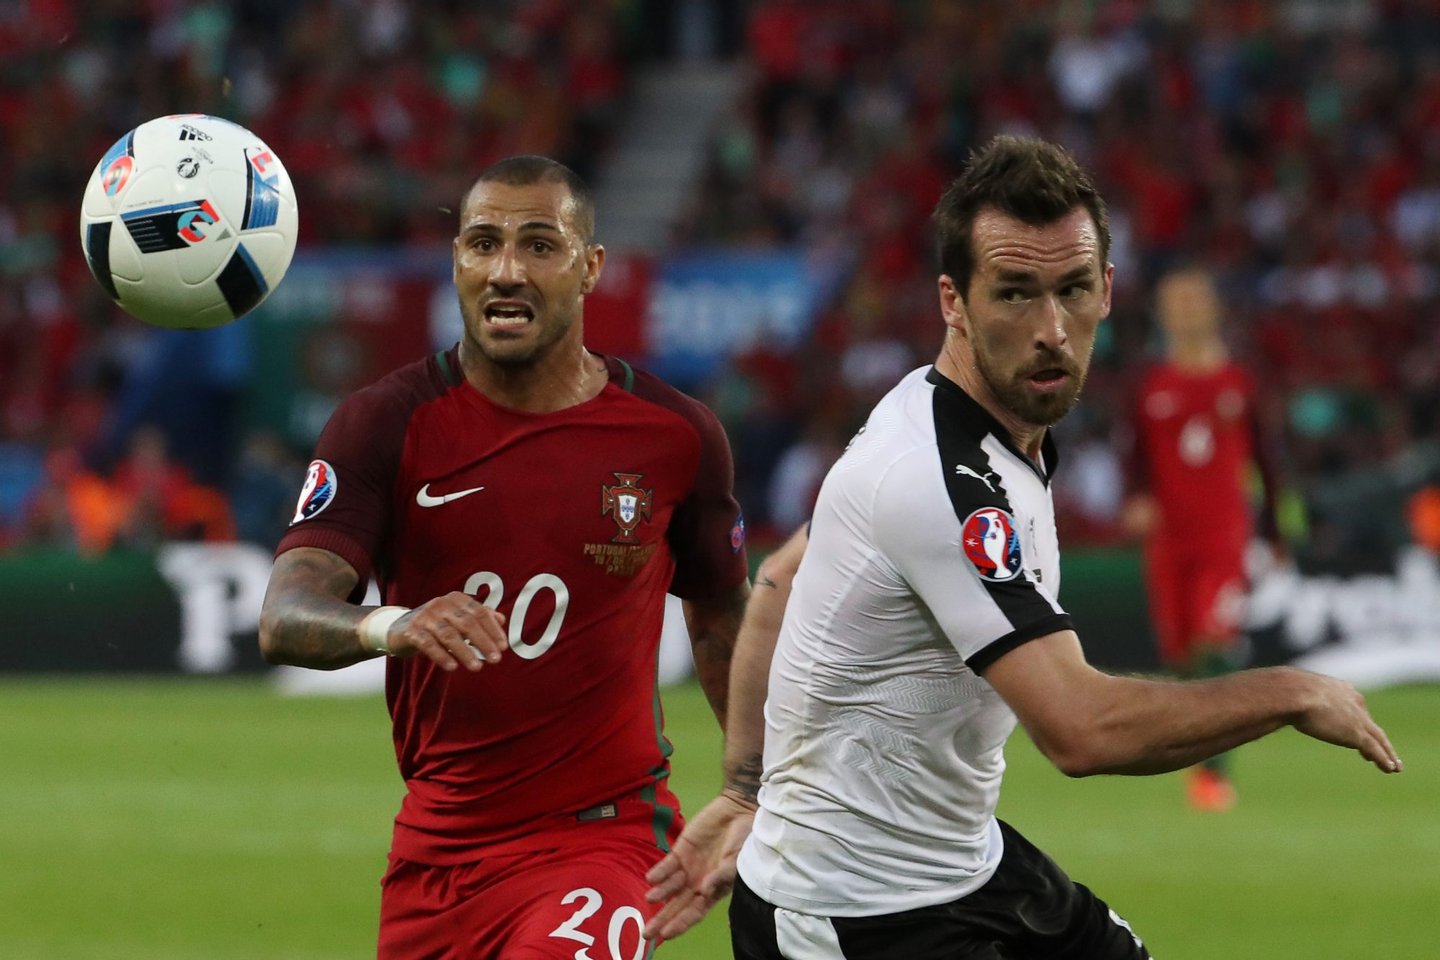 Portugal's forward Ricardo Quaresma (L) vies with Austria's defender Christian Fuchs during the Euro 2016 group F football match between Portugal and Austria at the Parc des Princes in Paris on June 18, 2016. / AFP / KENZO TRIBOUILLARD (Photo credit should read KENZO TRIBOUILLARD/AFP/Getty Images)